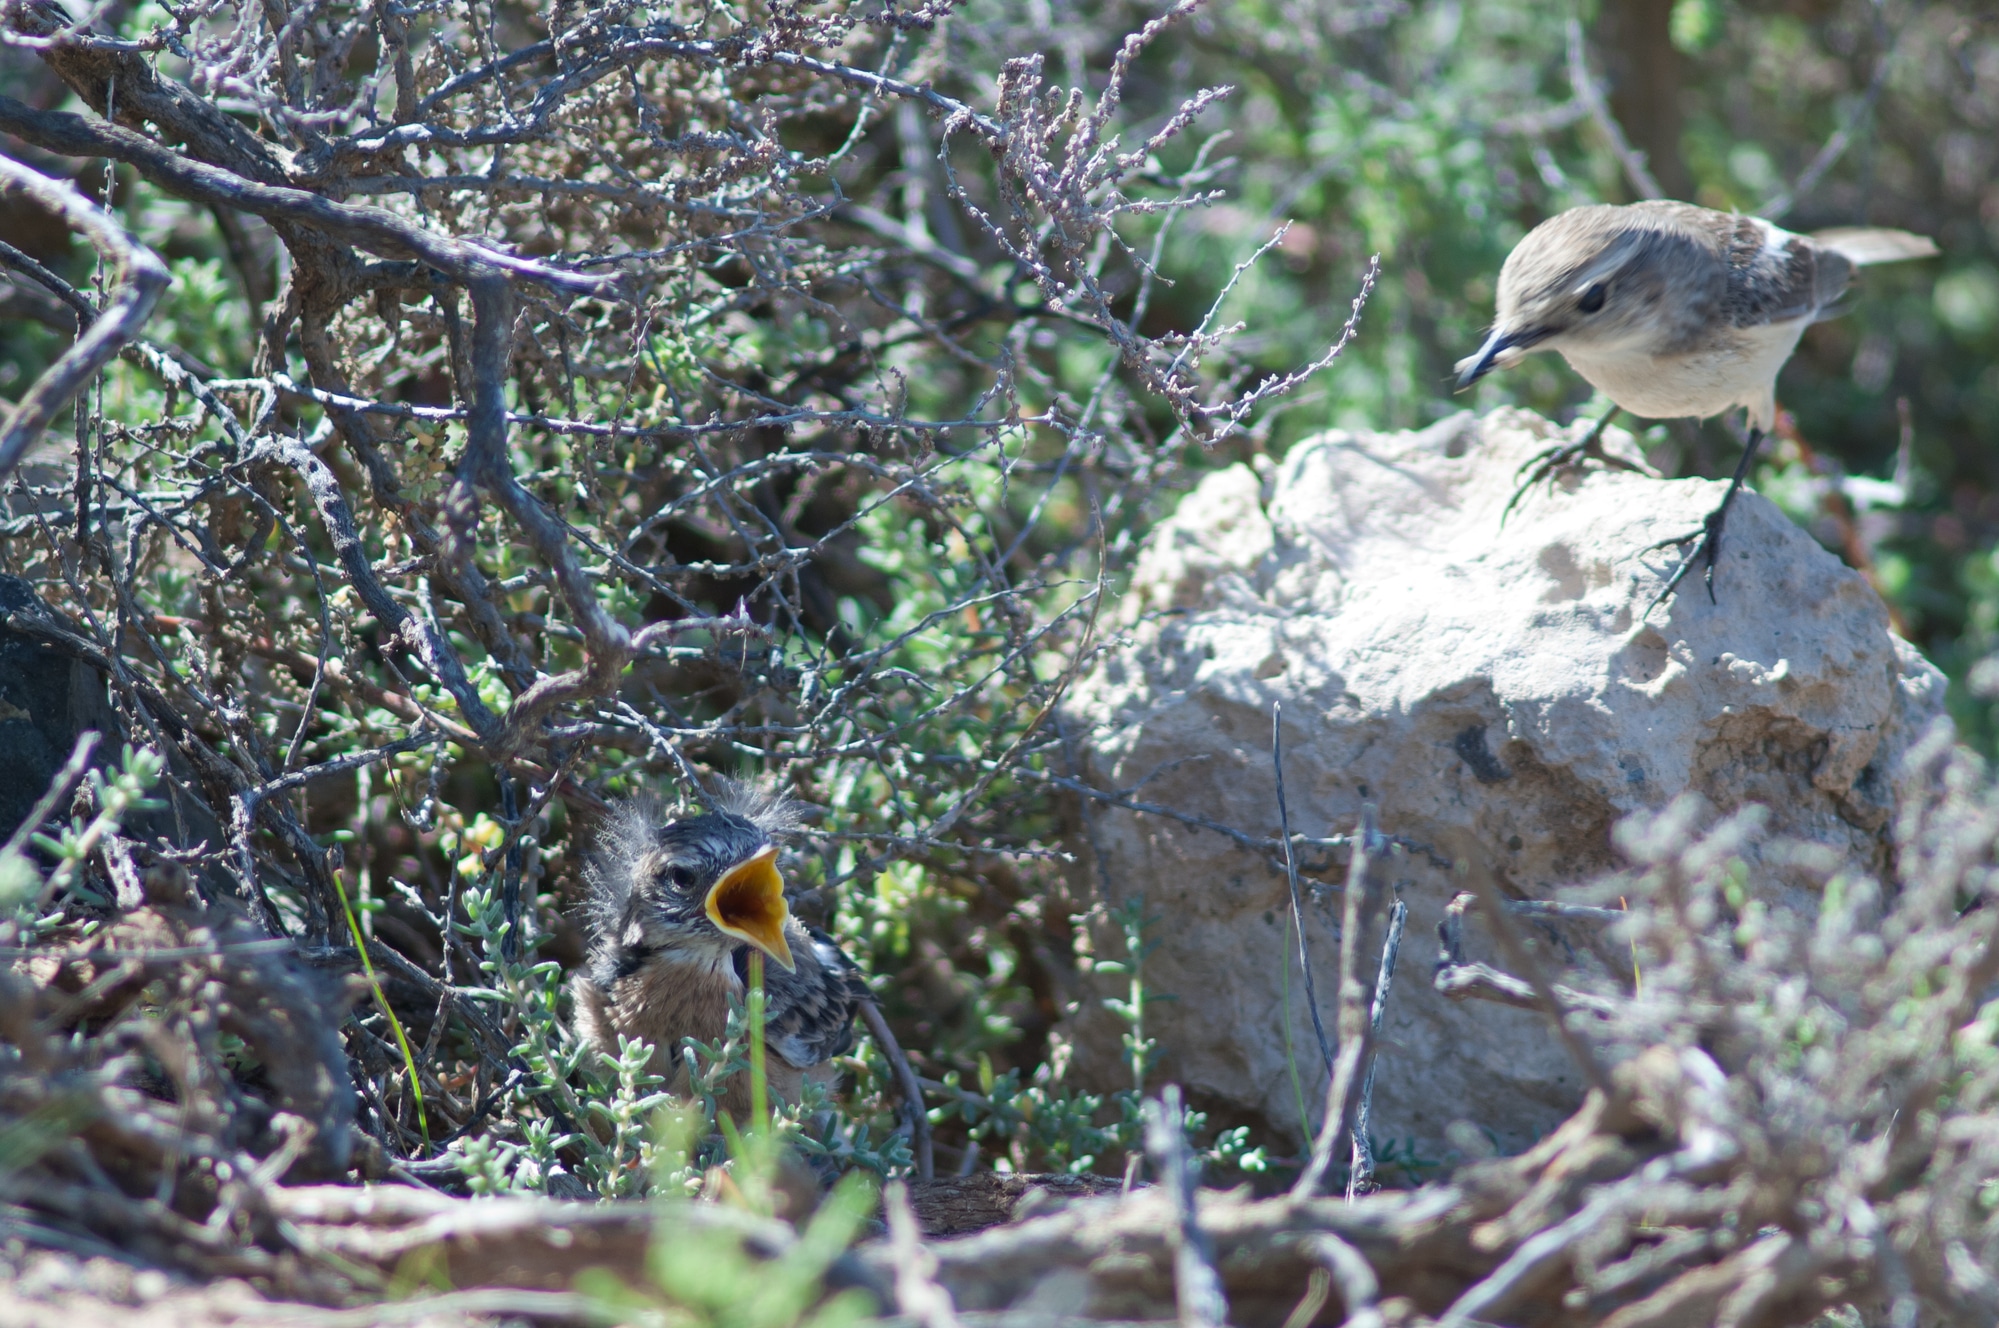 Canary Islands stonechats Saxicola dacotiae. Female with food to one of its chicks.